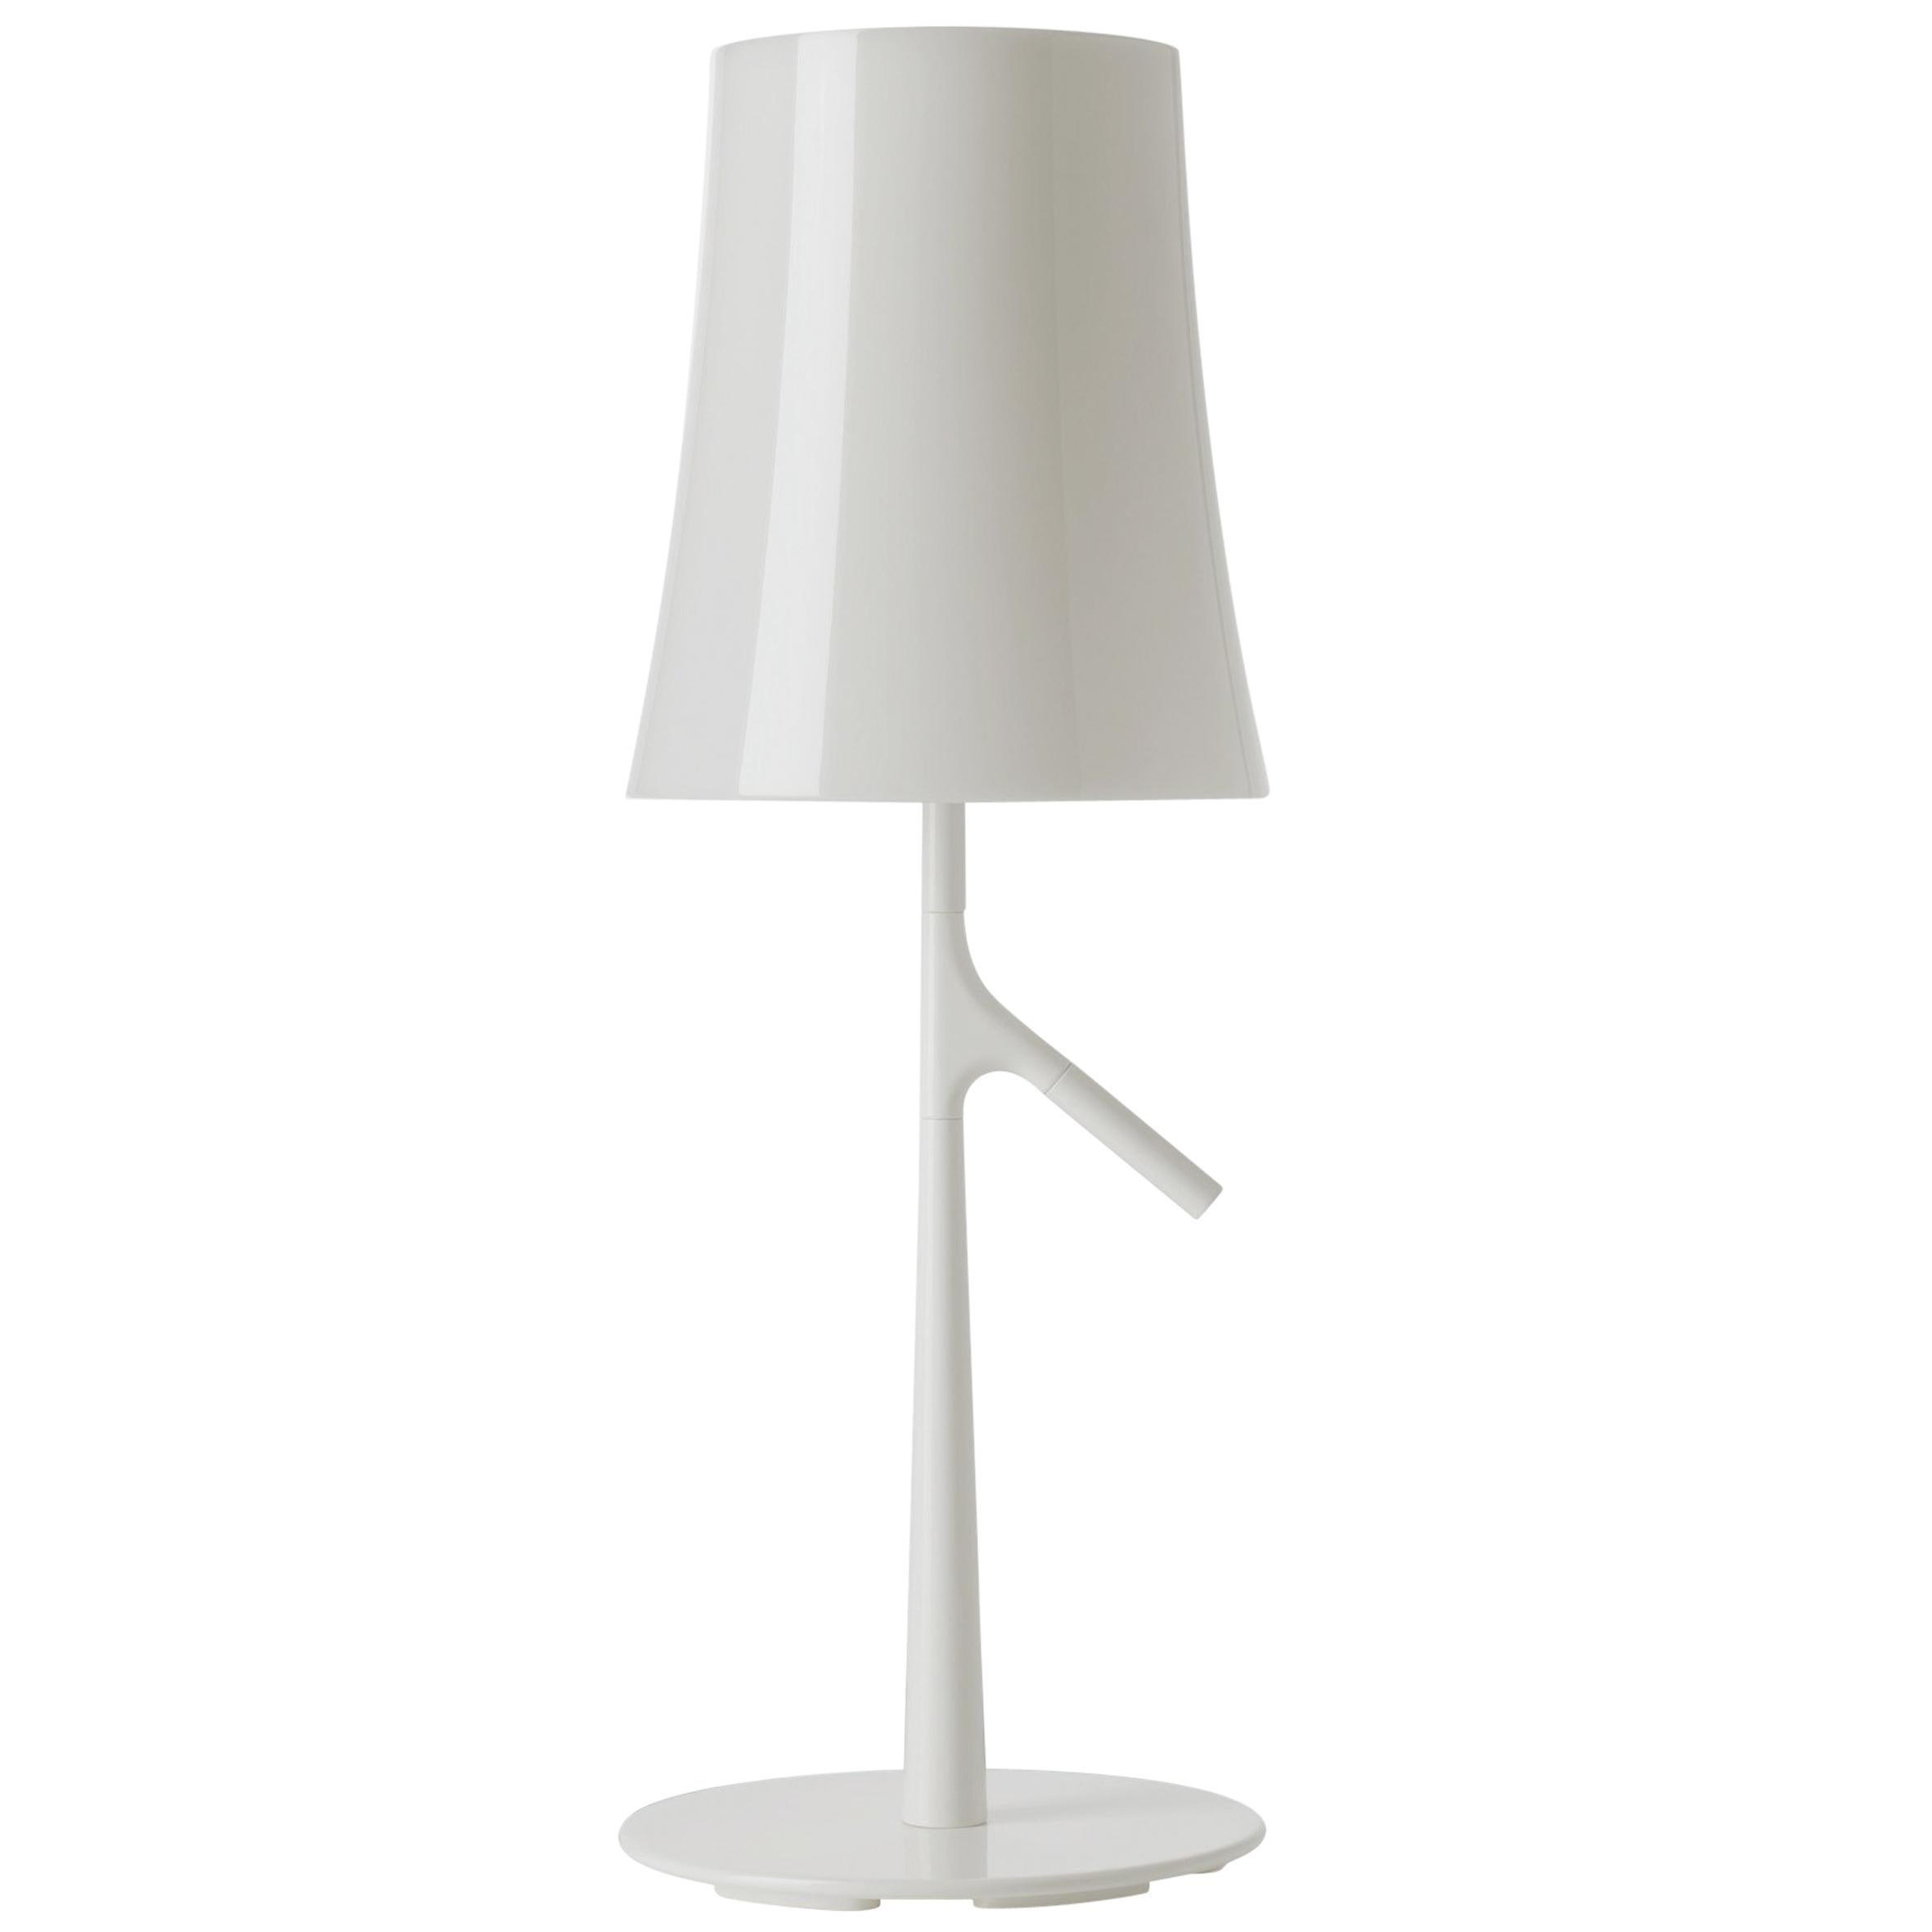 Foscarini Large Dimmable Birdie Table Lamp in White, Ludovica & Roberto Palomba For Sale